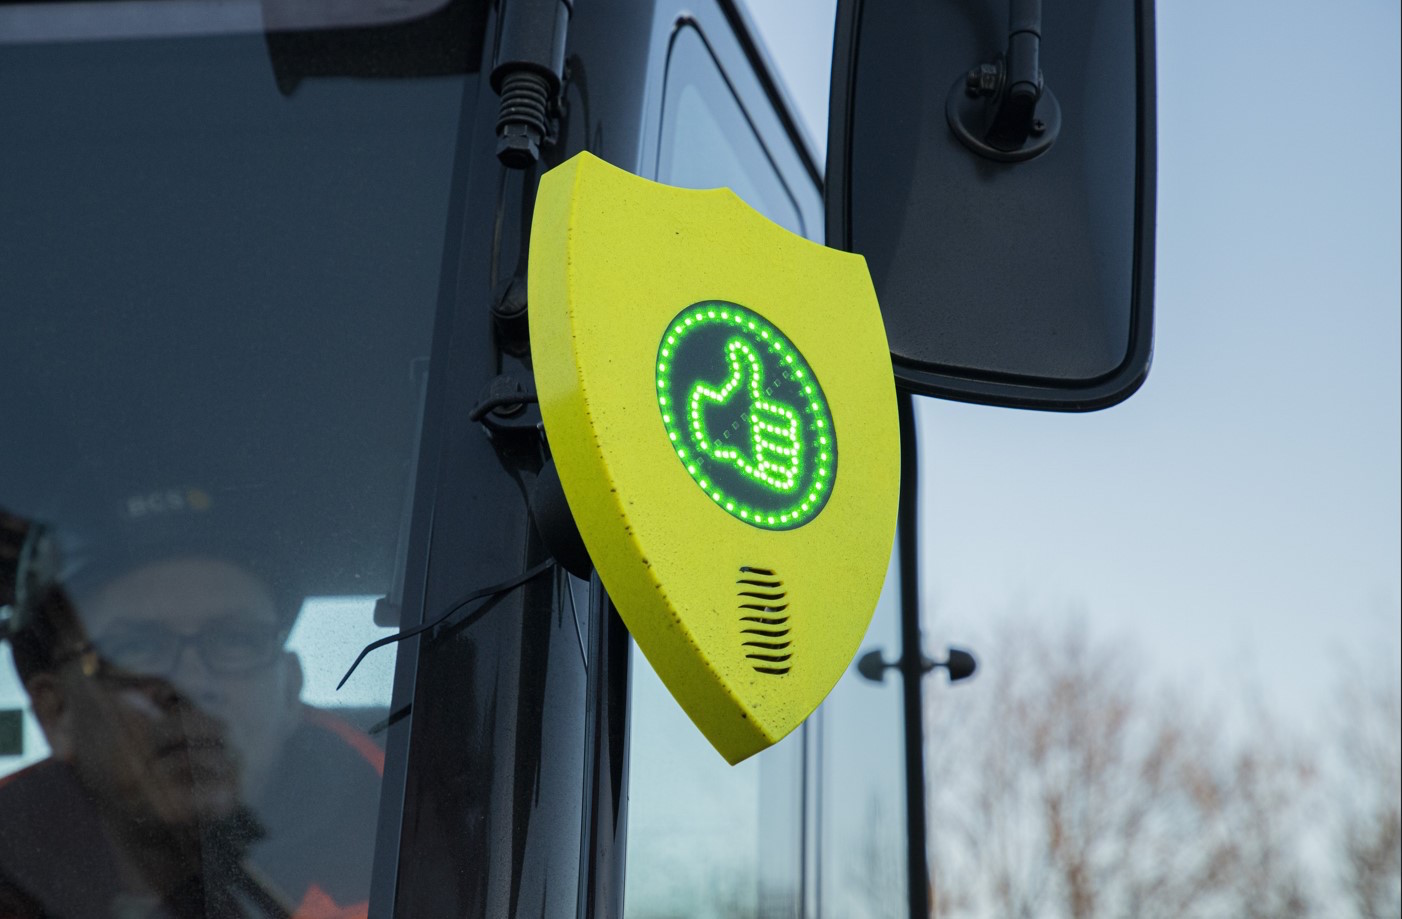 A green thumbs up light in a ‘digital shield’ when it is safe to approach a machine on site (Image: BCS Group)